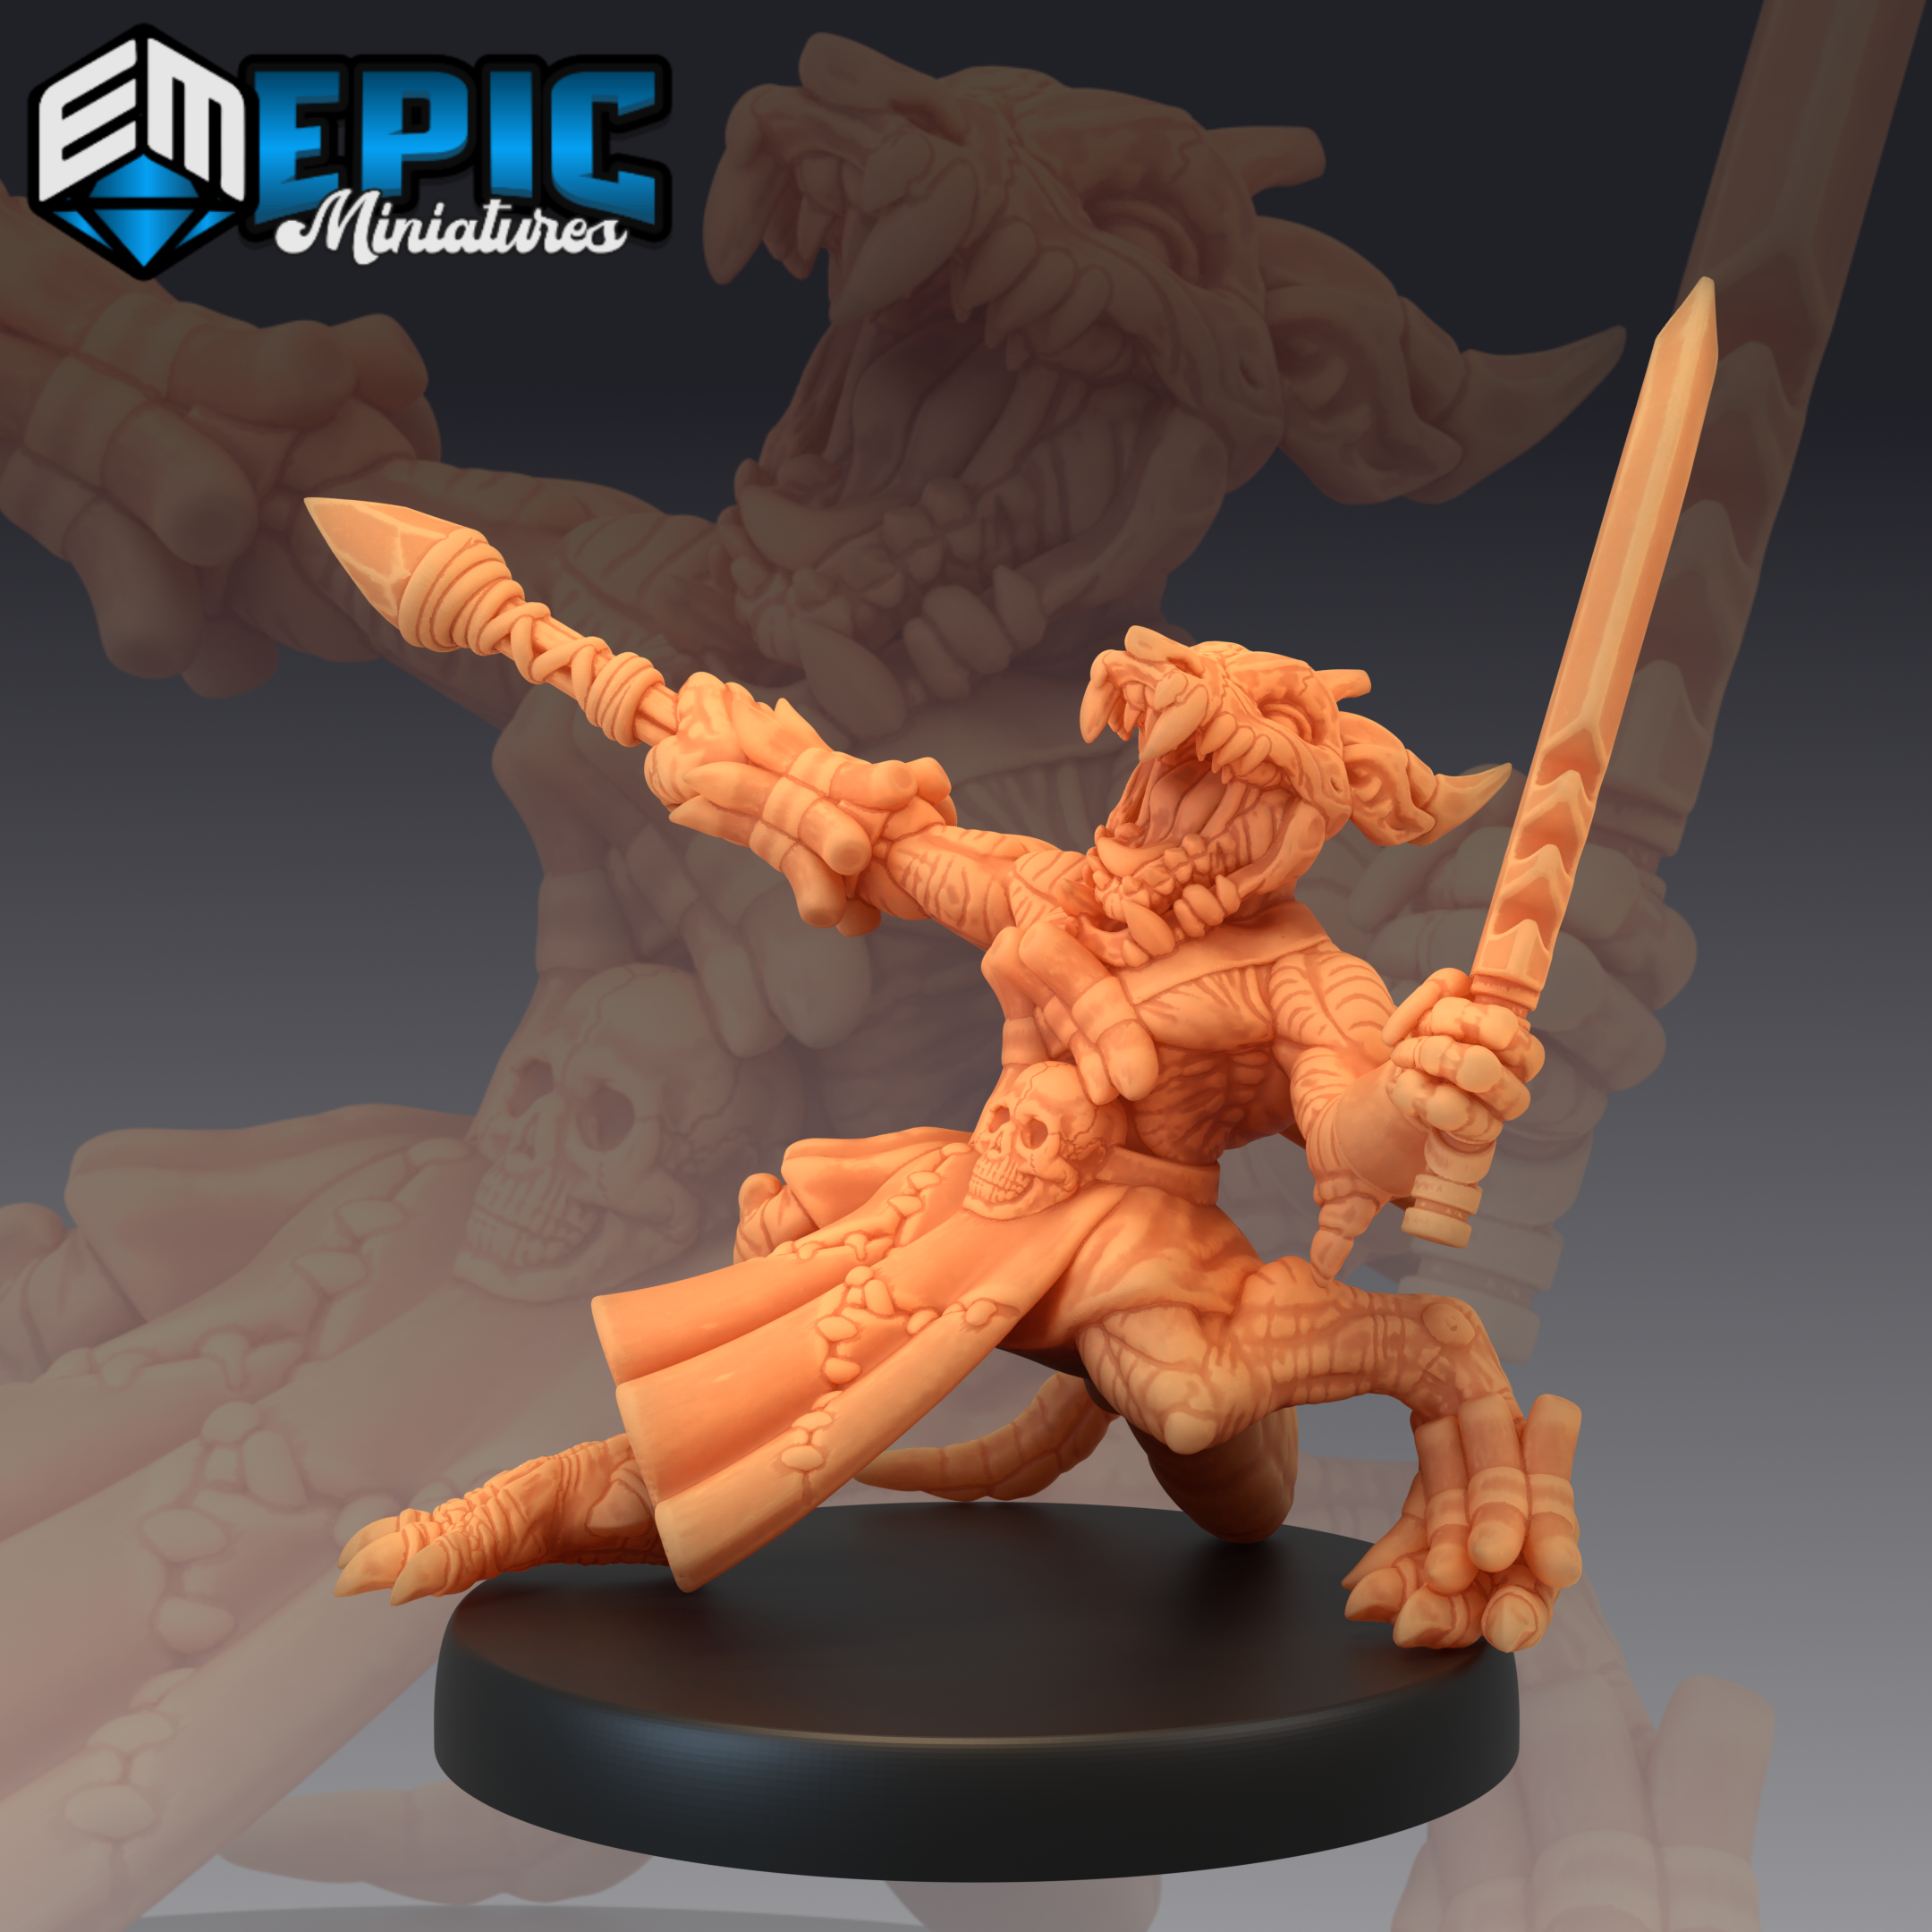 Mythical desert collection by Epic Miniatures